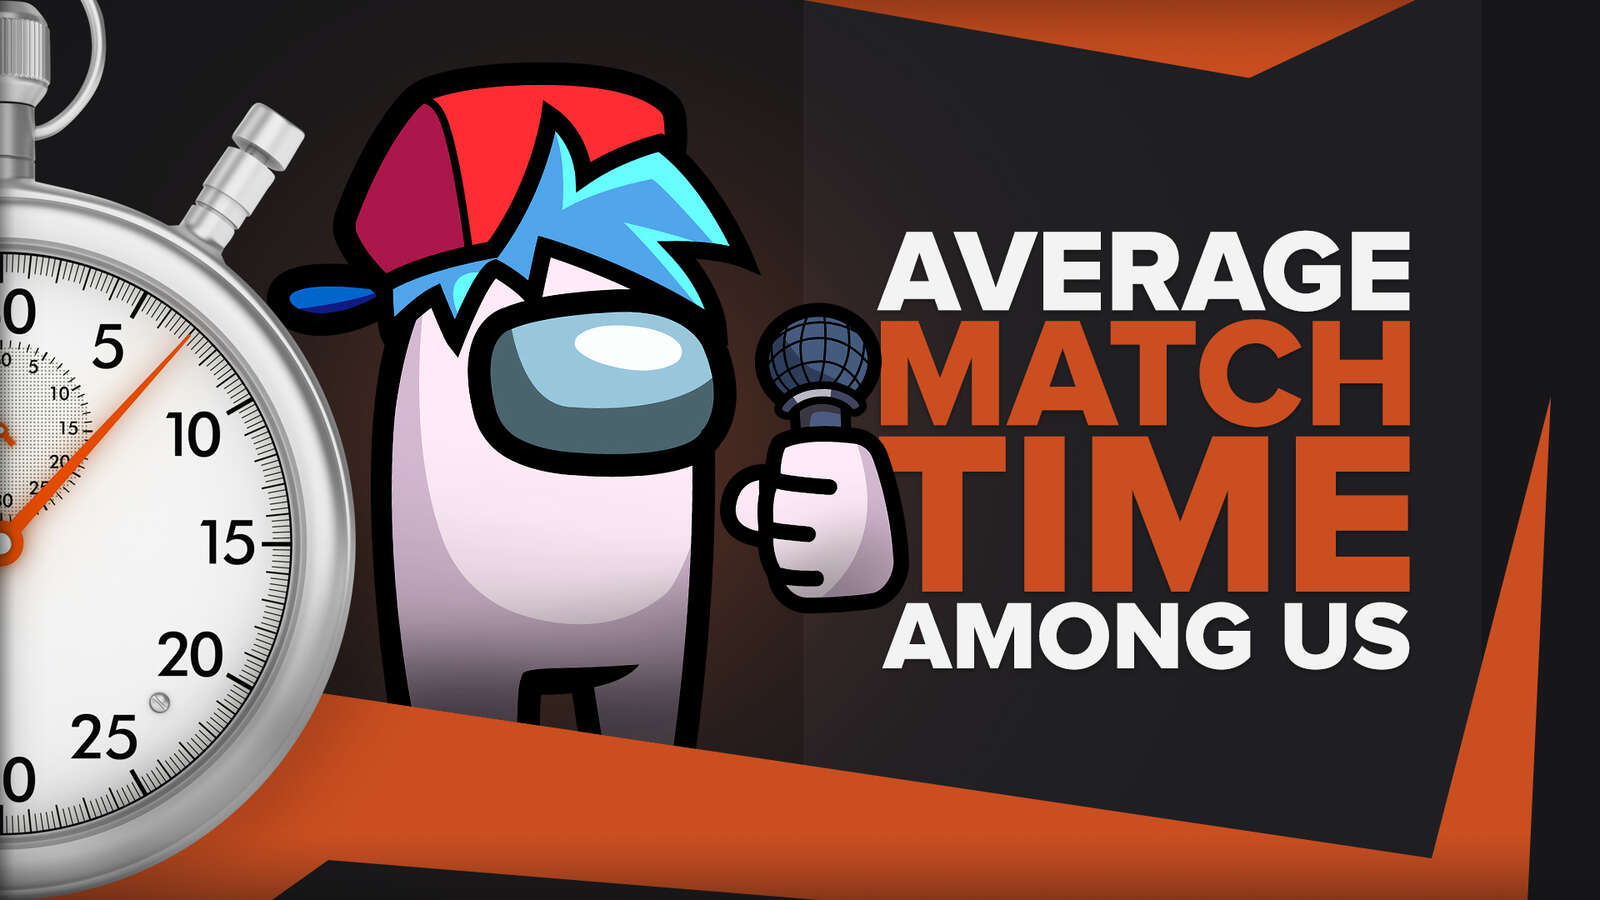 What's The Average Match Length Of Among Us?